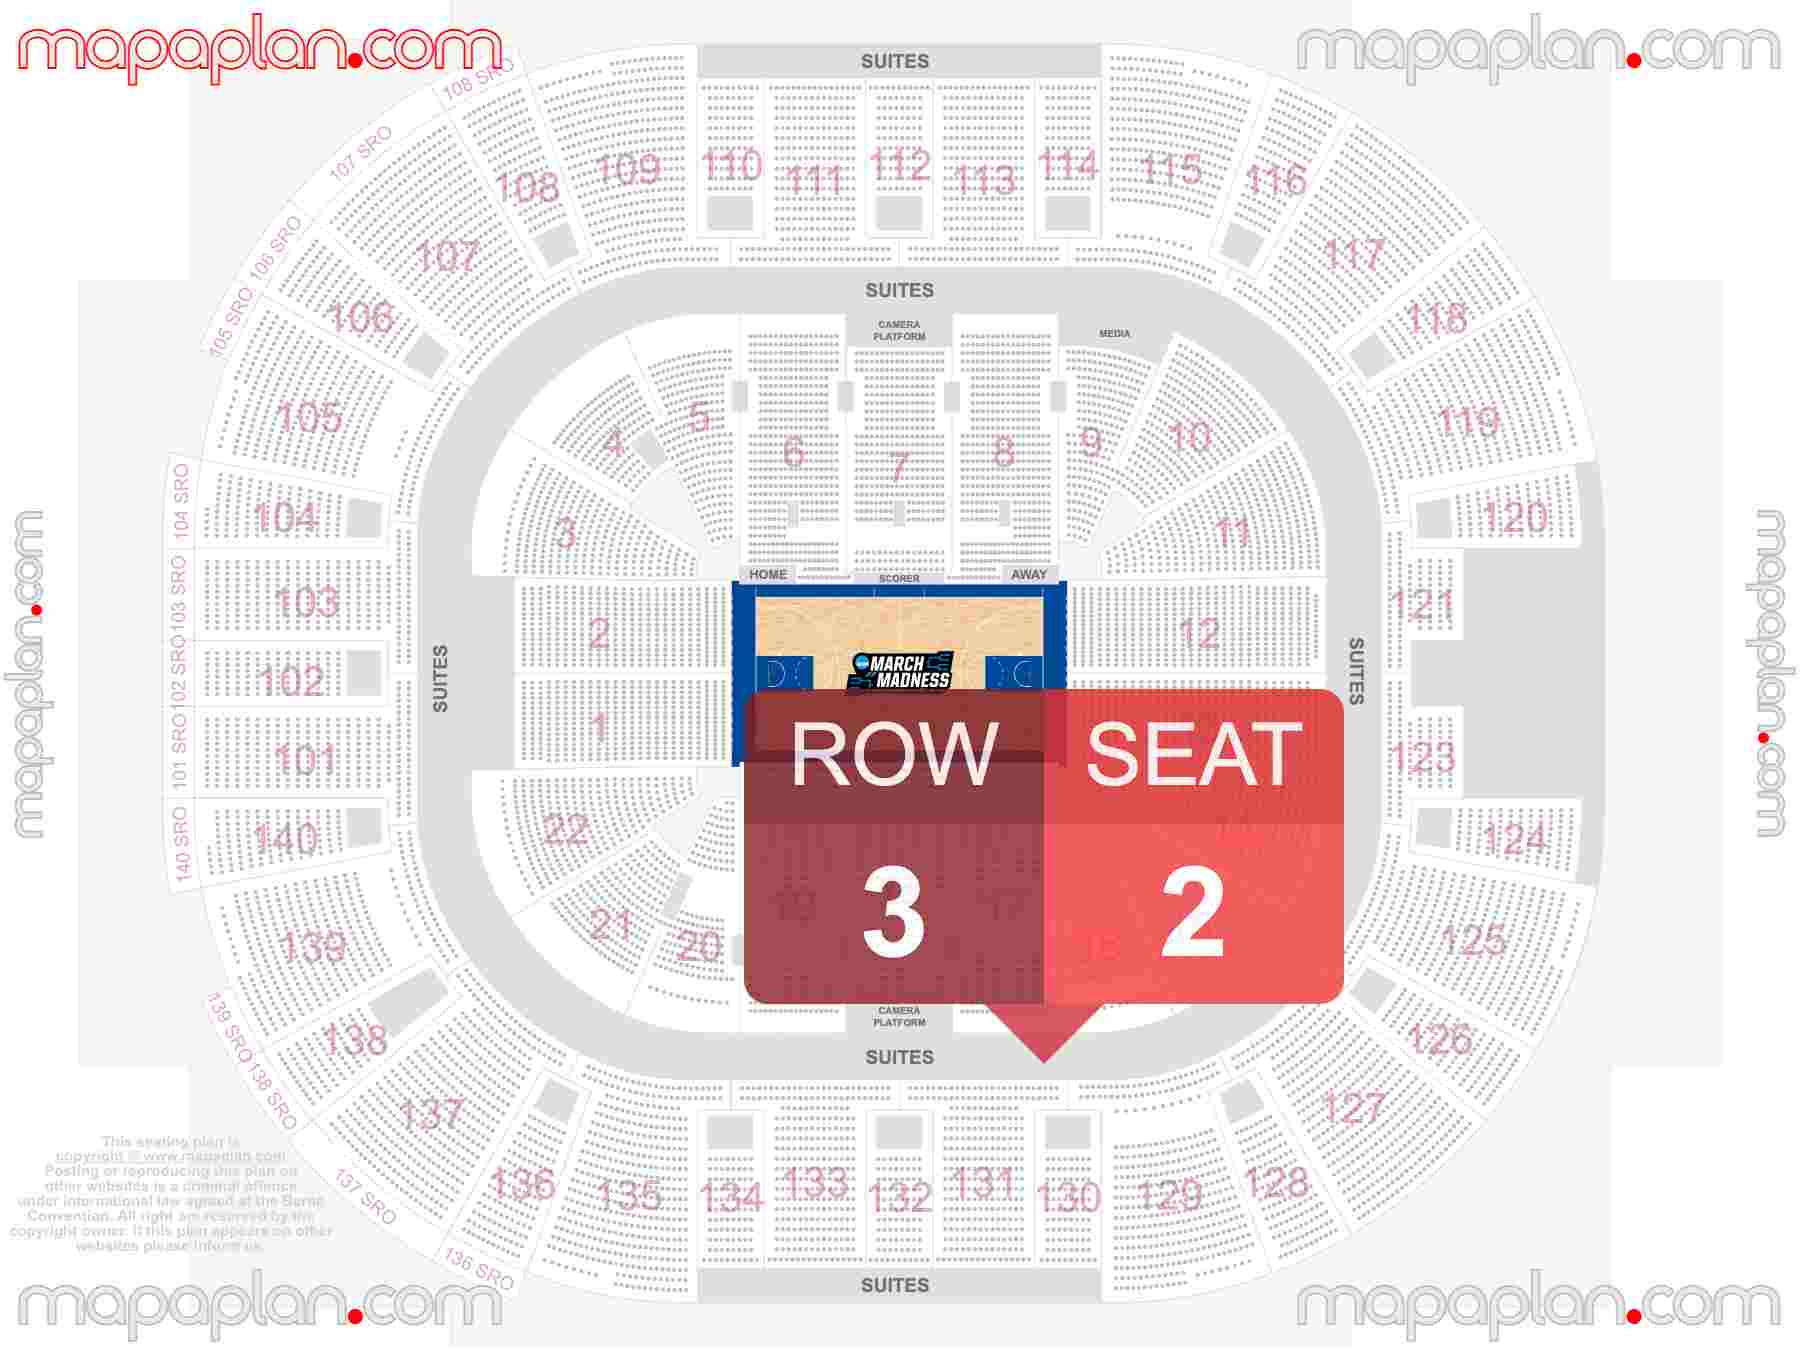 Salt Lake City Delta Center seating chart Utah Jazz NBA basketball detailed seat numbers and row numbering chart with interactive map plan layout